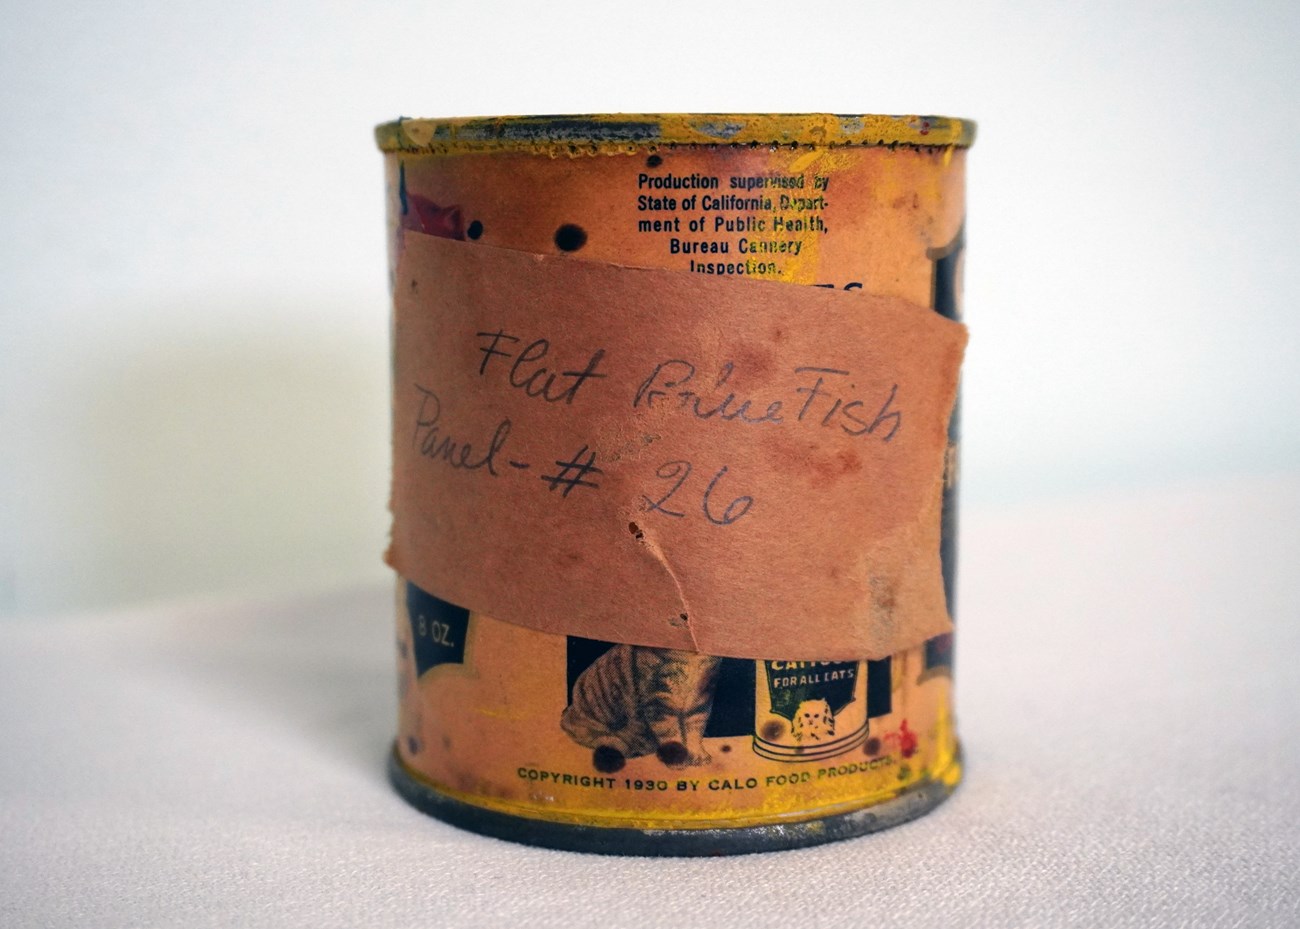 Cylindrical metal can with yellow paint remnants has handwritten note that reads “Flat Blue Fish, Panel - #26.”